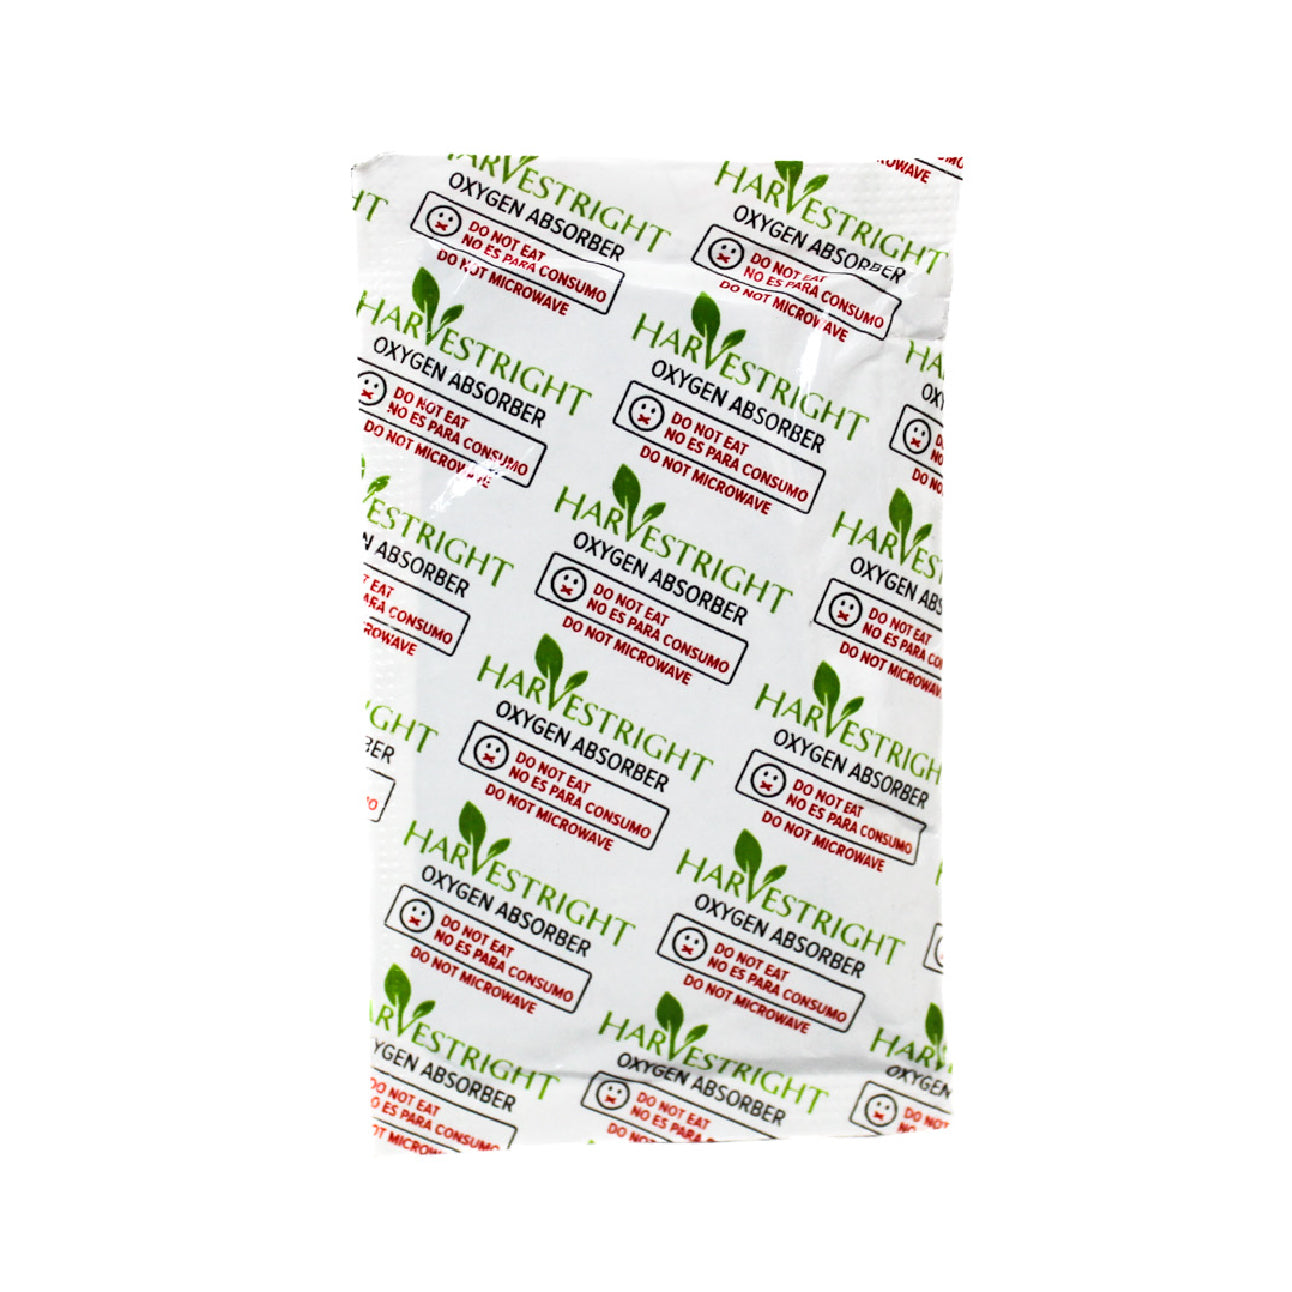 Harvest Right | Oxygen Absorbers 50-Pack